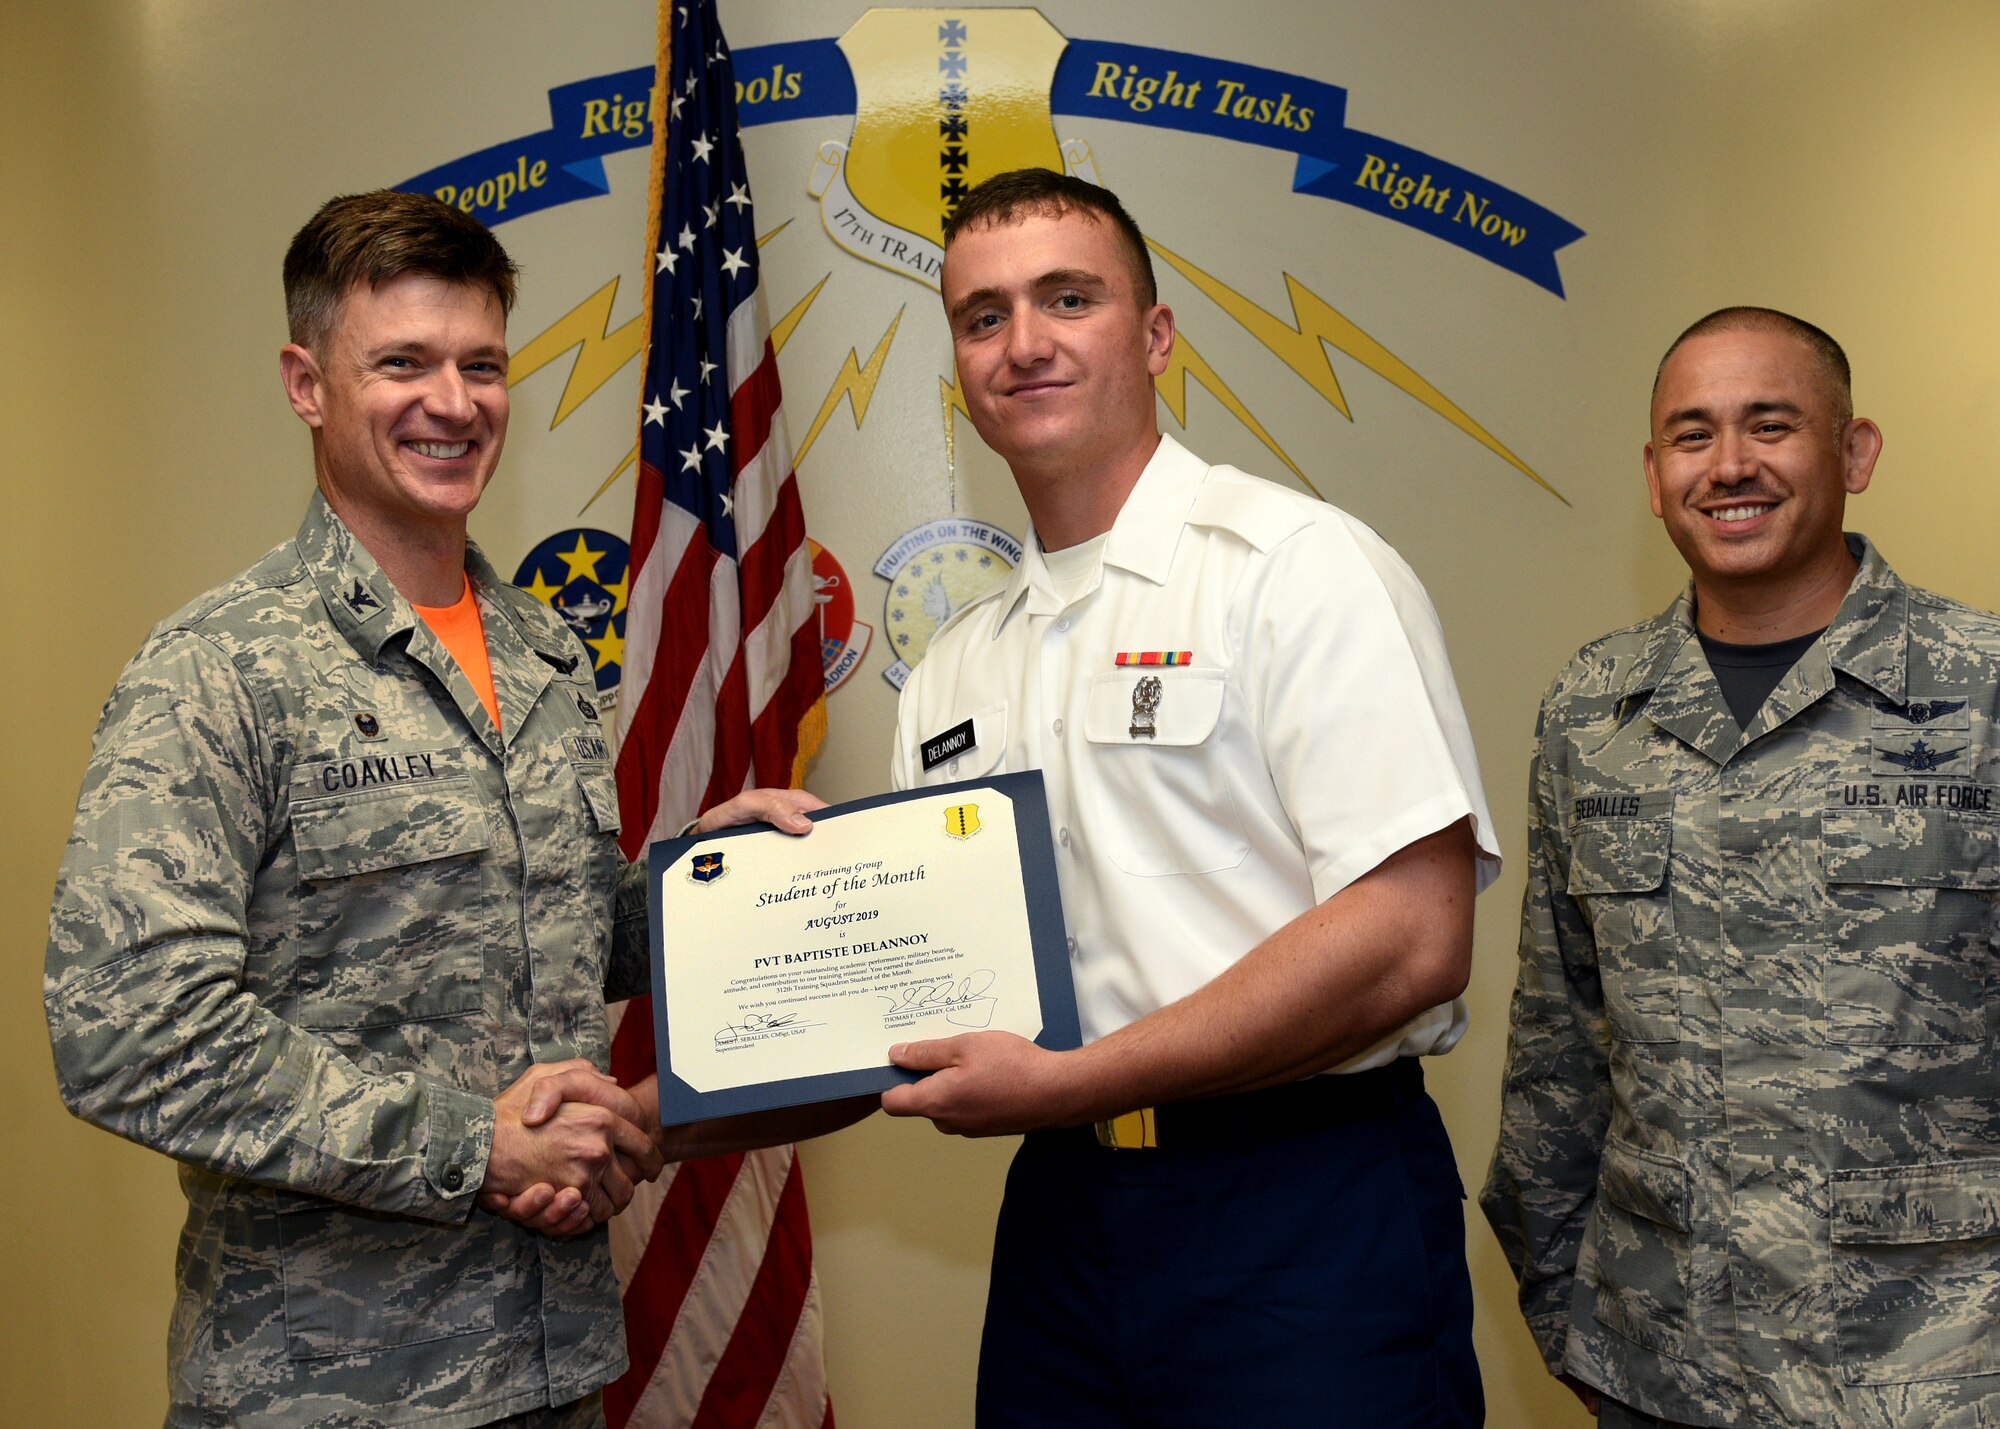 U.S. Air Force Col. Thomas Coakley, 17th Training Group commander, presents the 312th Training Squadron Student of the Month award to U.S. Army Pvt. Baptiste Delannoy, 312th TRS student, at Brandenburg Hall on Goodfellow Air Force Base, Texas, September 6, 2019. The 312th TRS’s mission is to provide Department of Defense and international customers with mission ready fire protection and special instruments graduates and provide mission support for the Air Force Technical Applications Center. (U.S. Air Force photo by Airman 1st Class Robyn Hunsinger/Released)